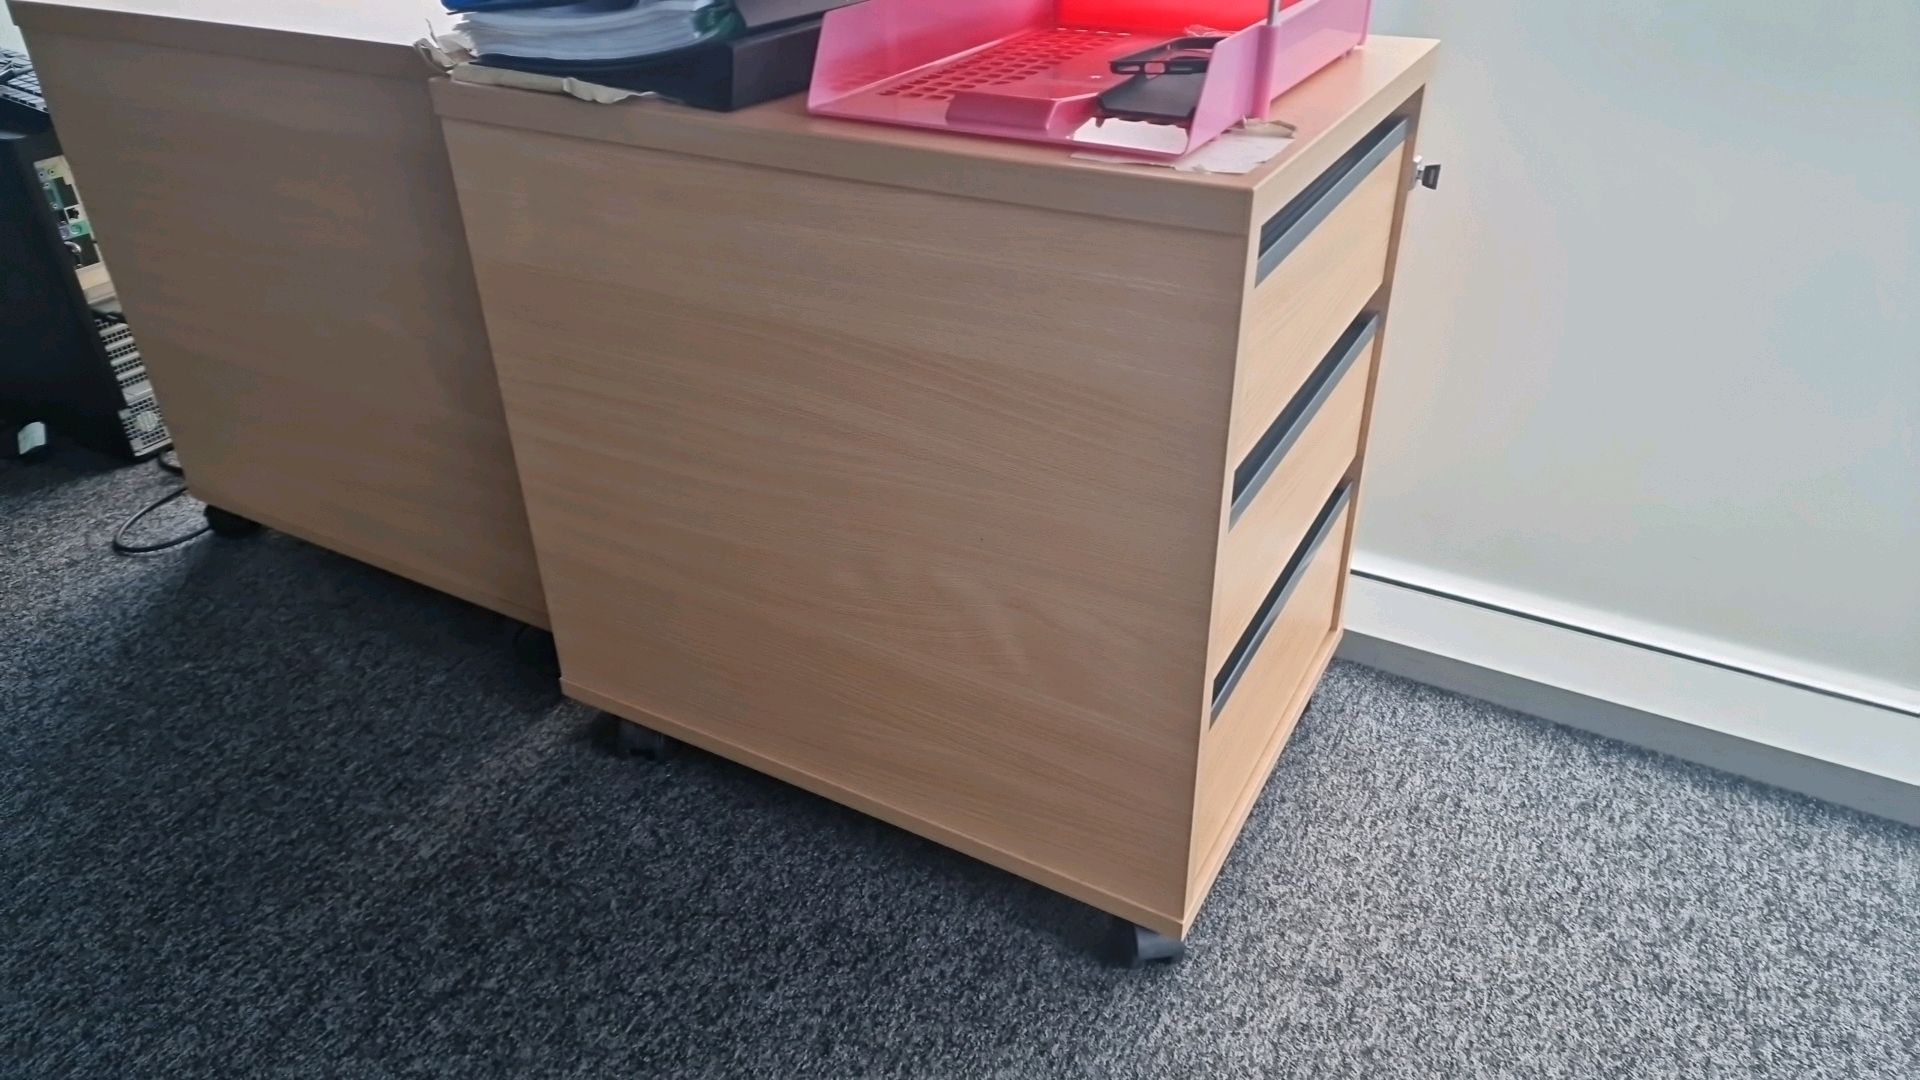 ref 56 - Office Drawer Units x5 - Image 2 of 5